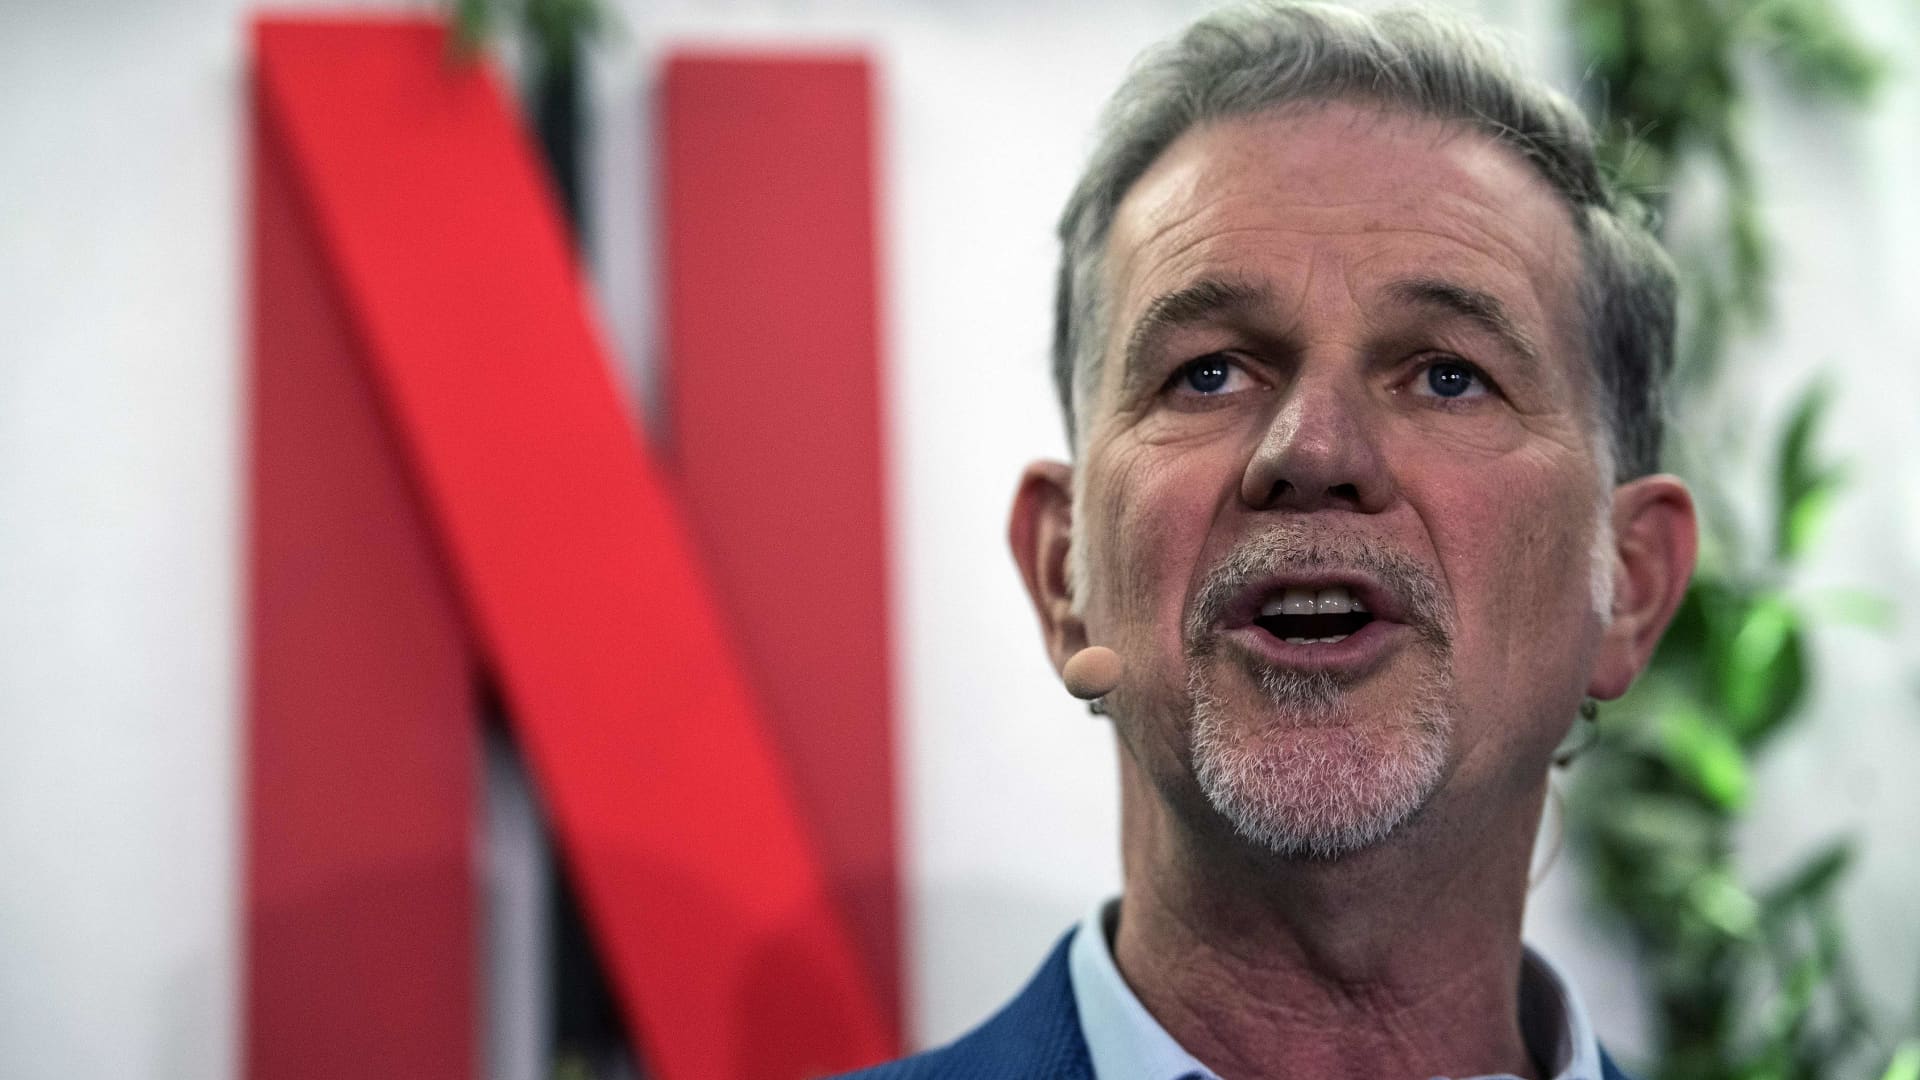 Co-founder and director of Netflix Reed Hastings delivers a speech as he inaugurates the new offices of Netflix France, in Paris on January 17, 2020.